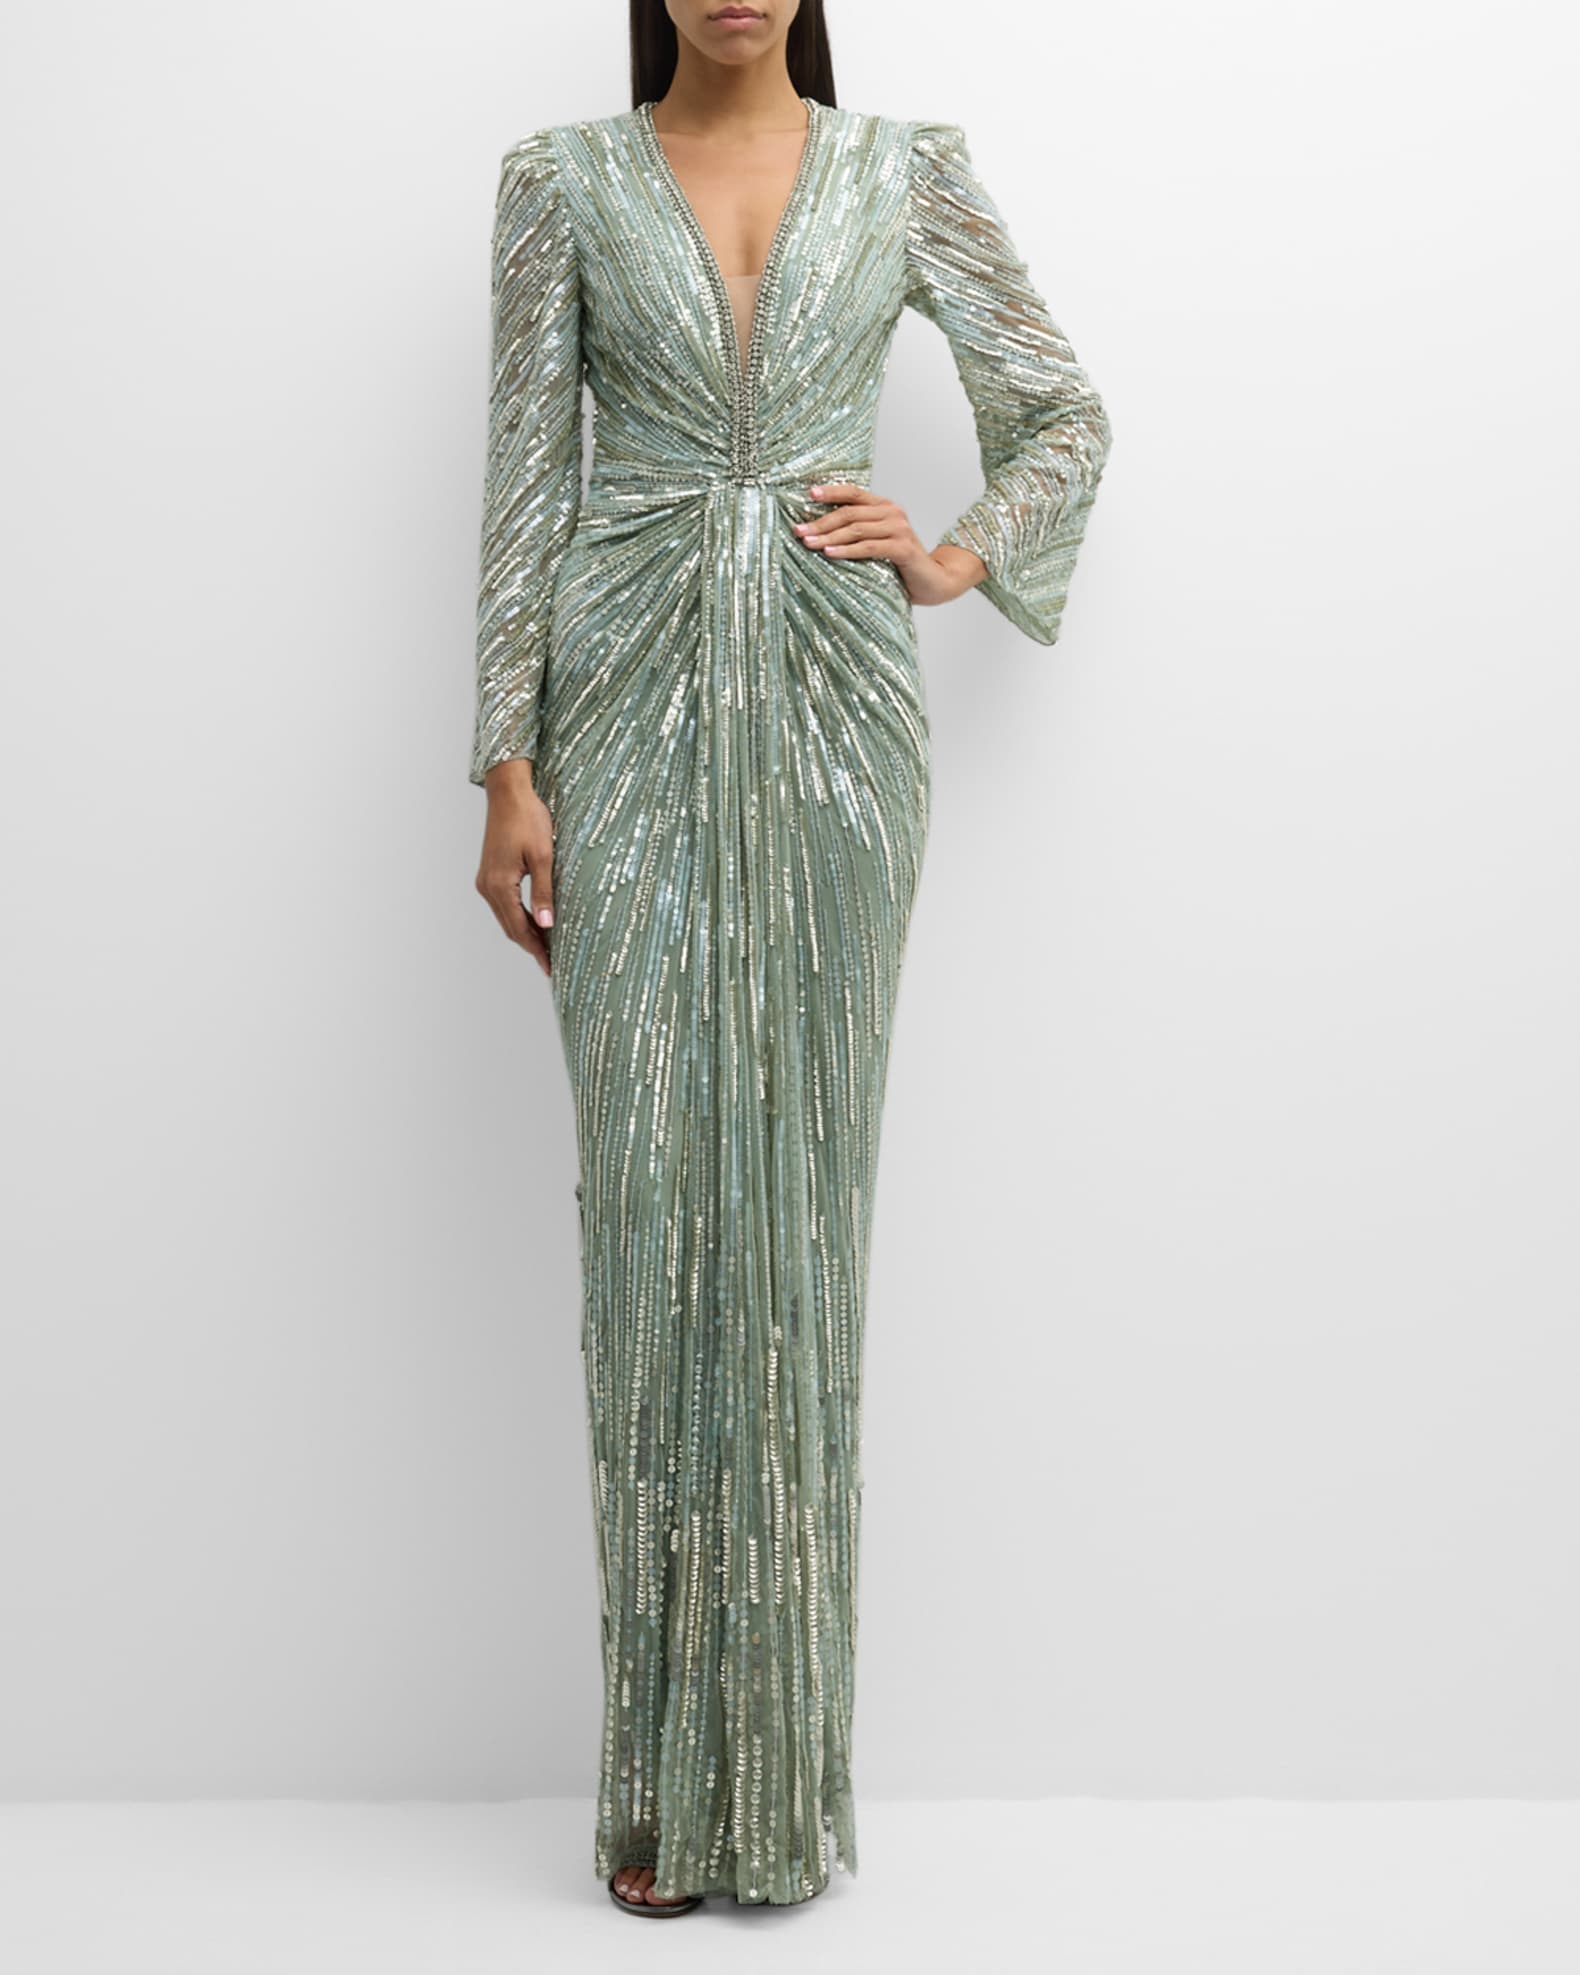 Jenny Packham Darcy Embellished Gown with Gathered Front | Neiman Marcus